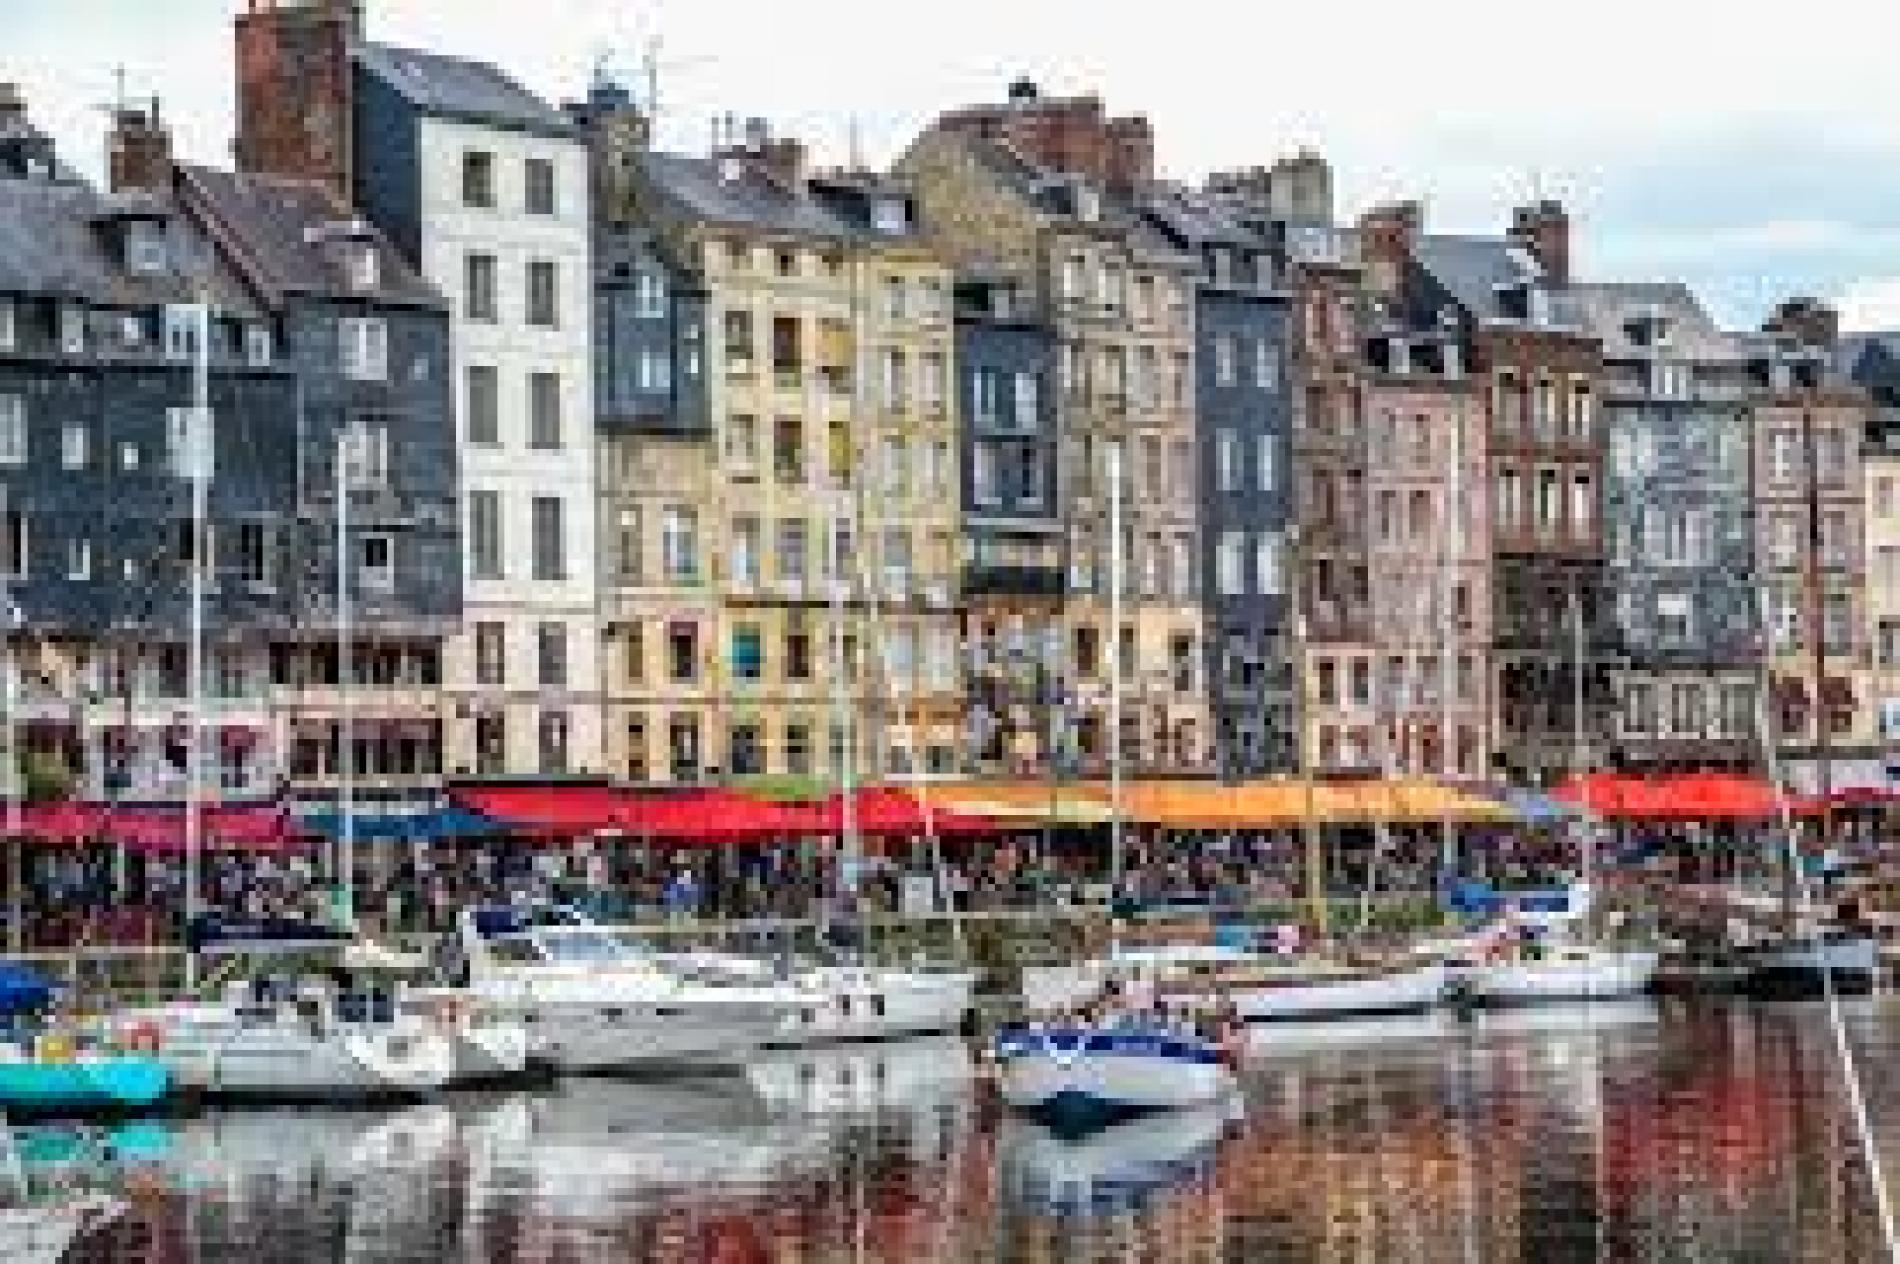 25 minutes from Honfleur